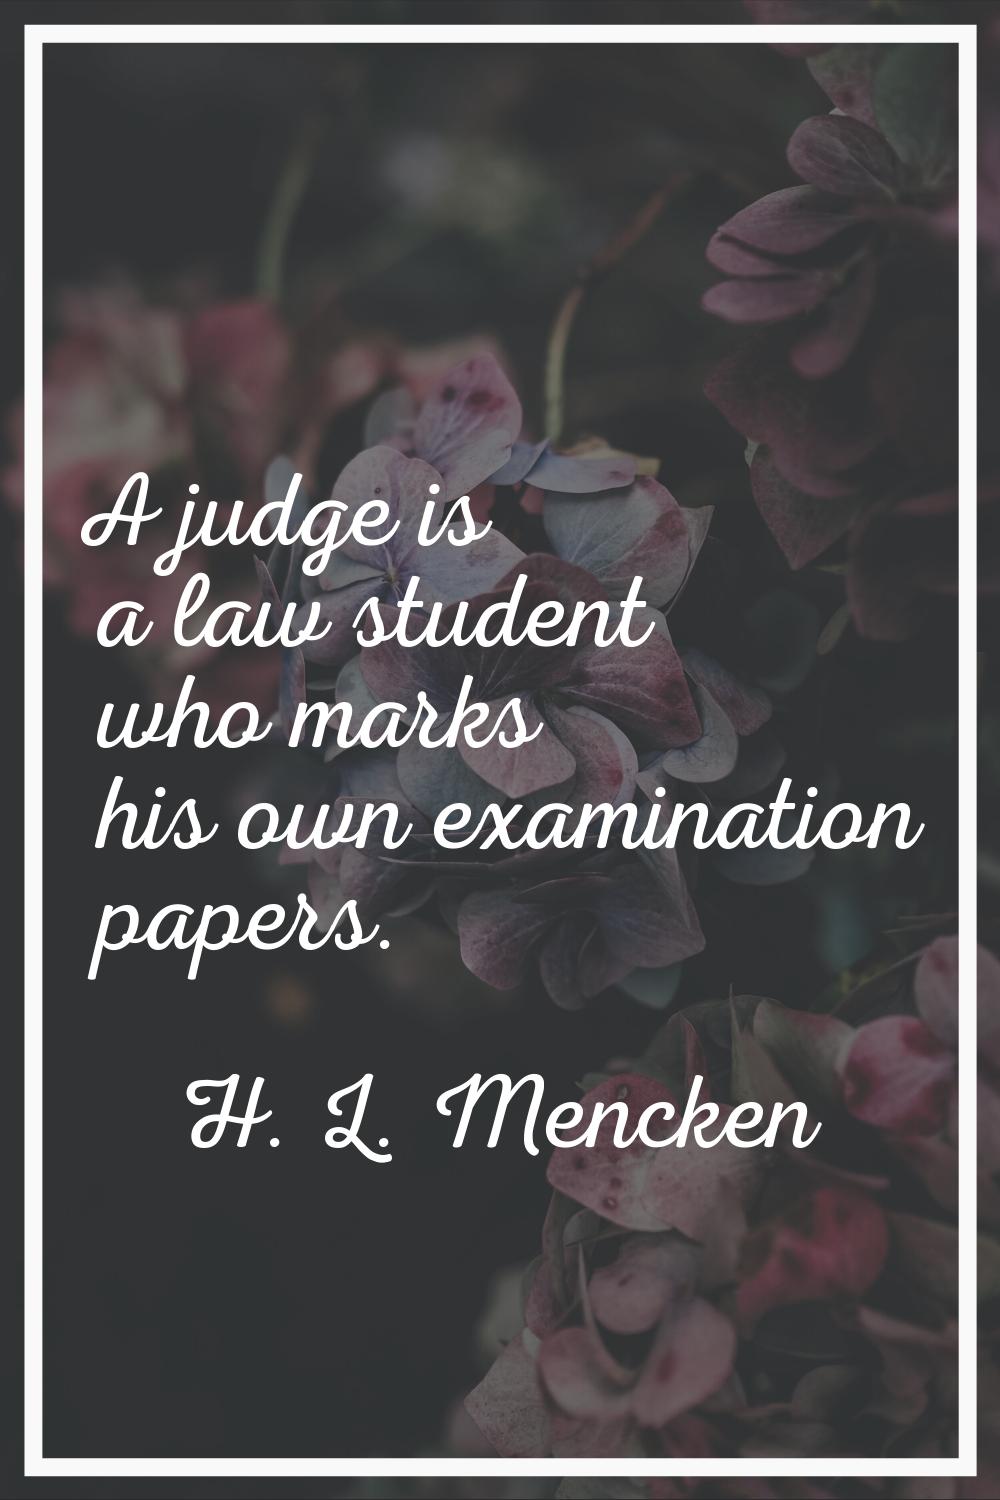 A judge is a law student who marks his own examination papers.